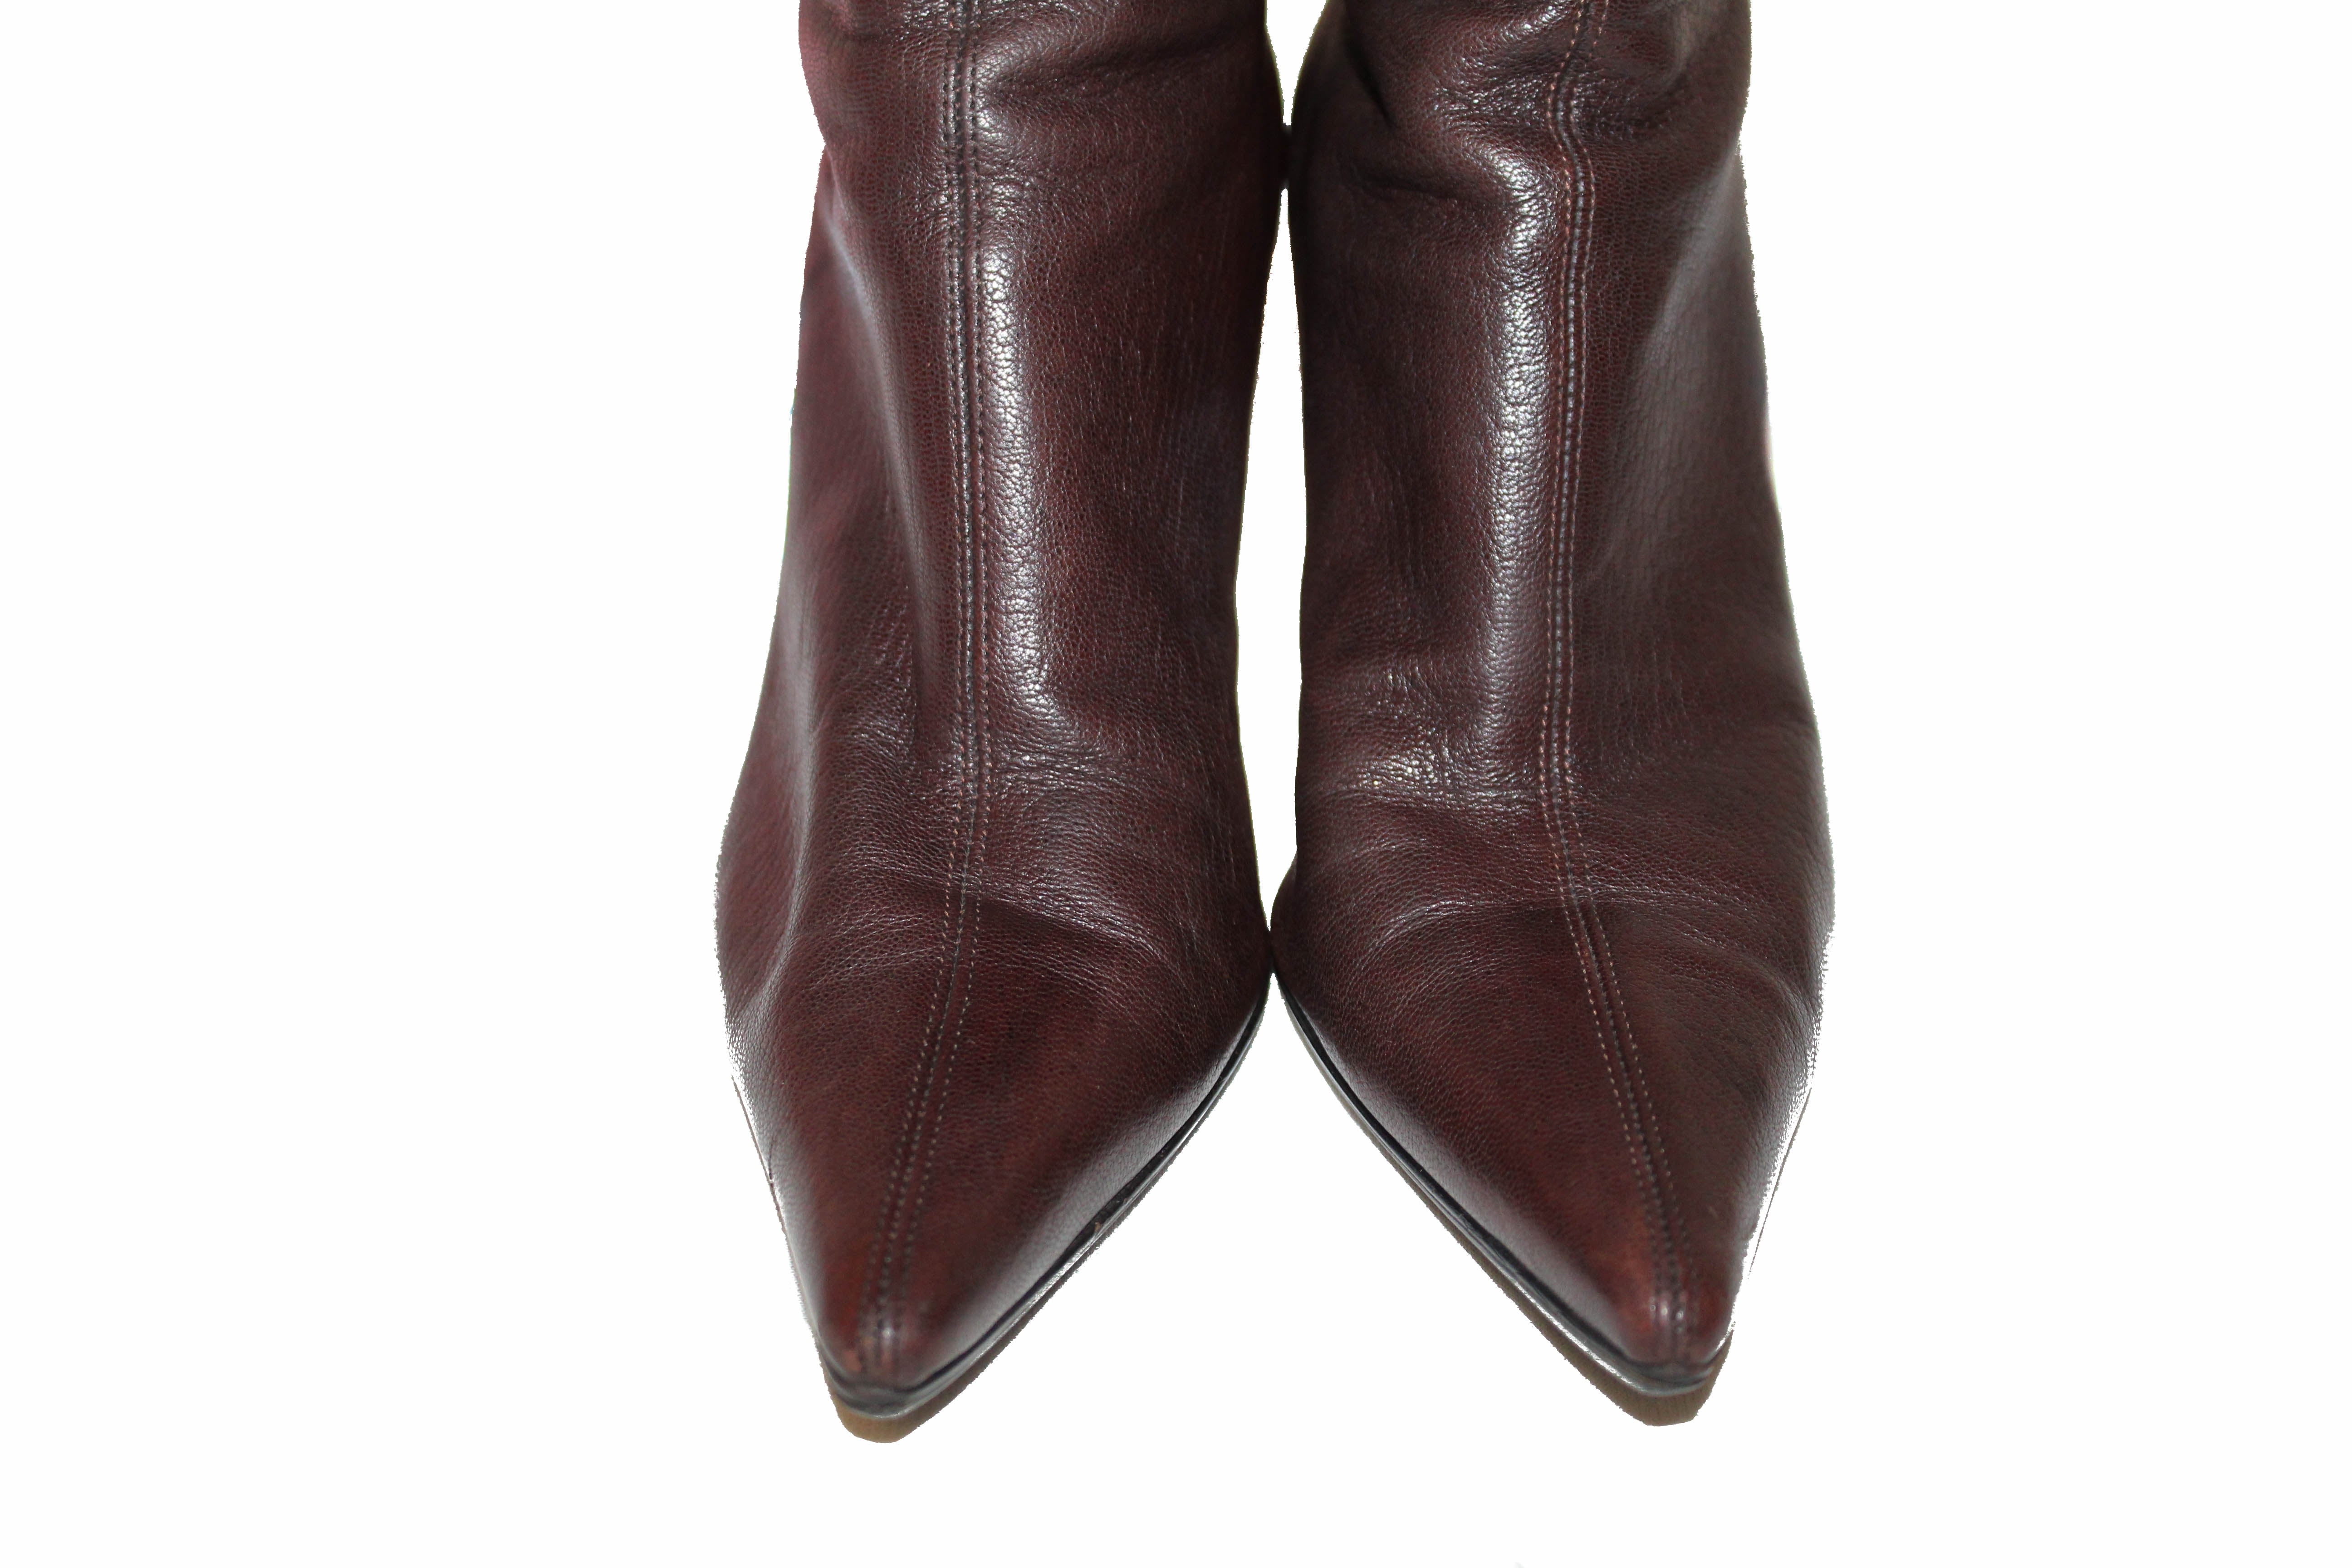 Authentic Gucci Brown Leather Tall Boots Size 7.5